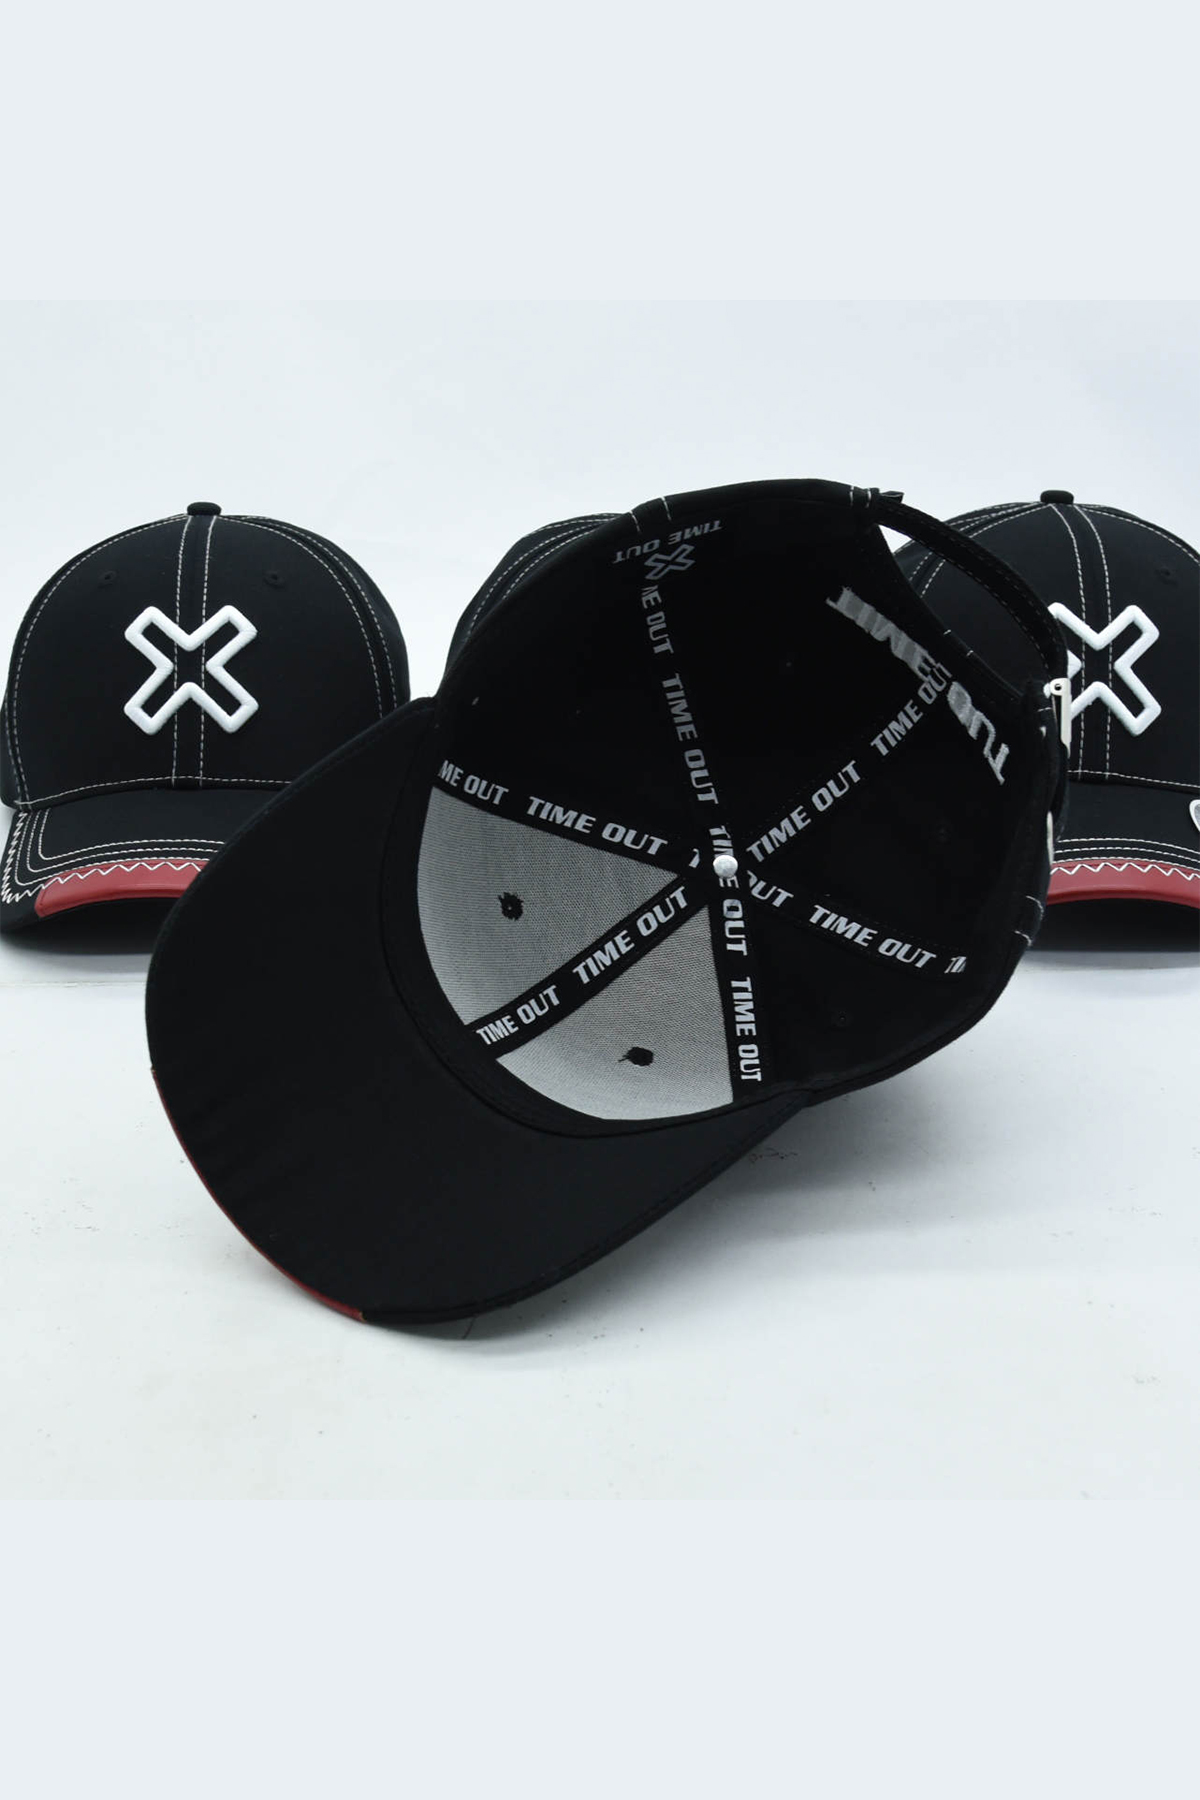 Time-Out-X-Cotton-Gym-Cap-Black-with-White-logo—inside